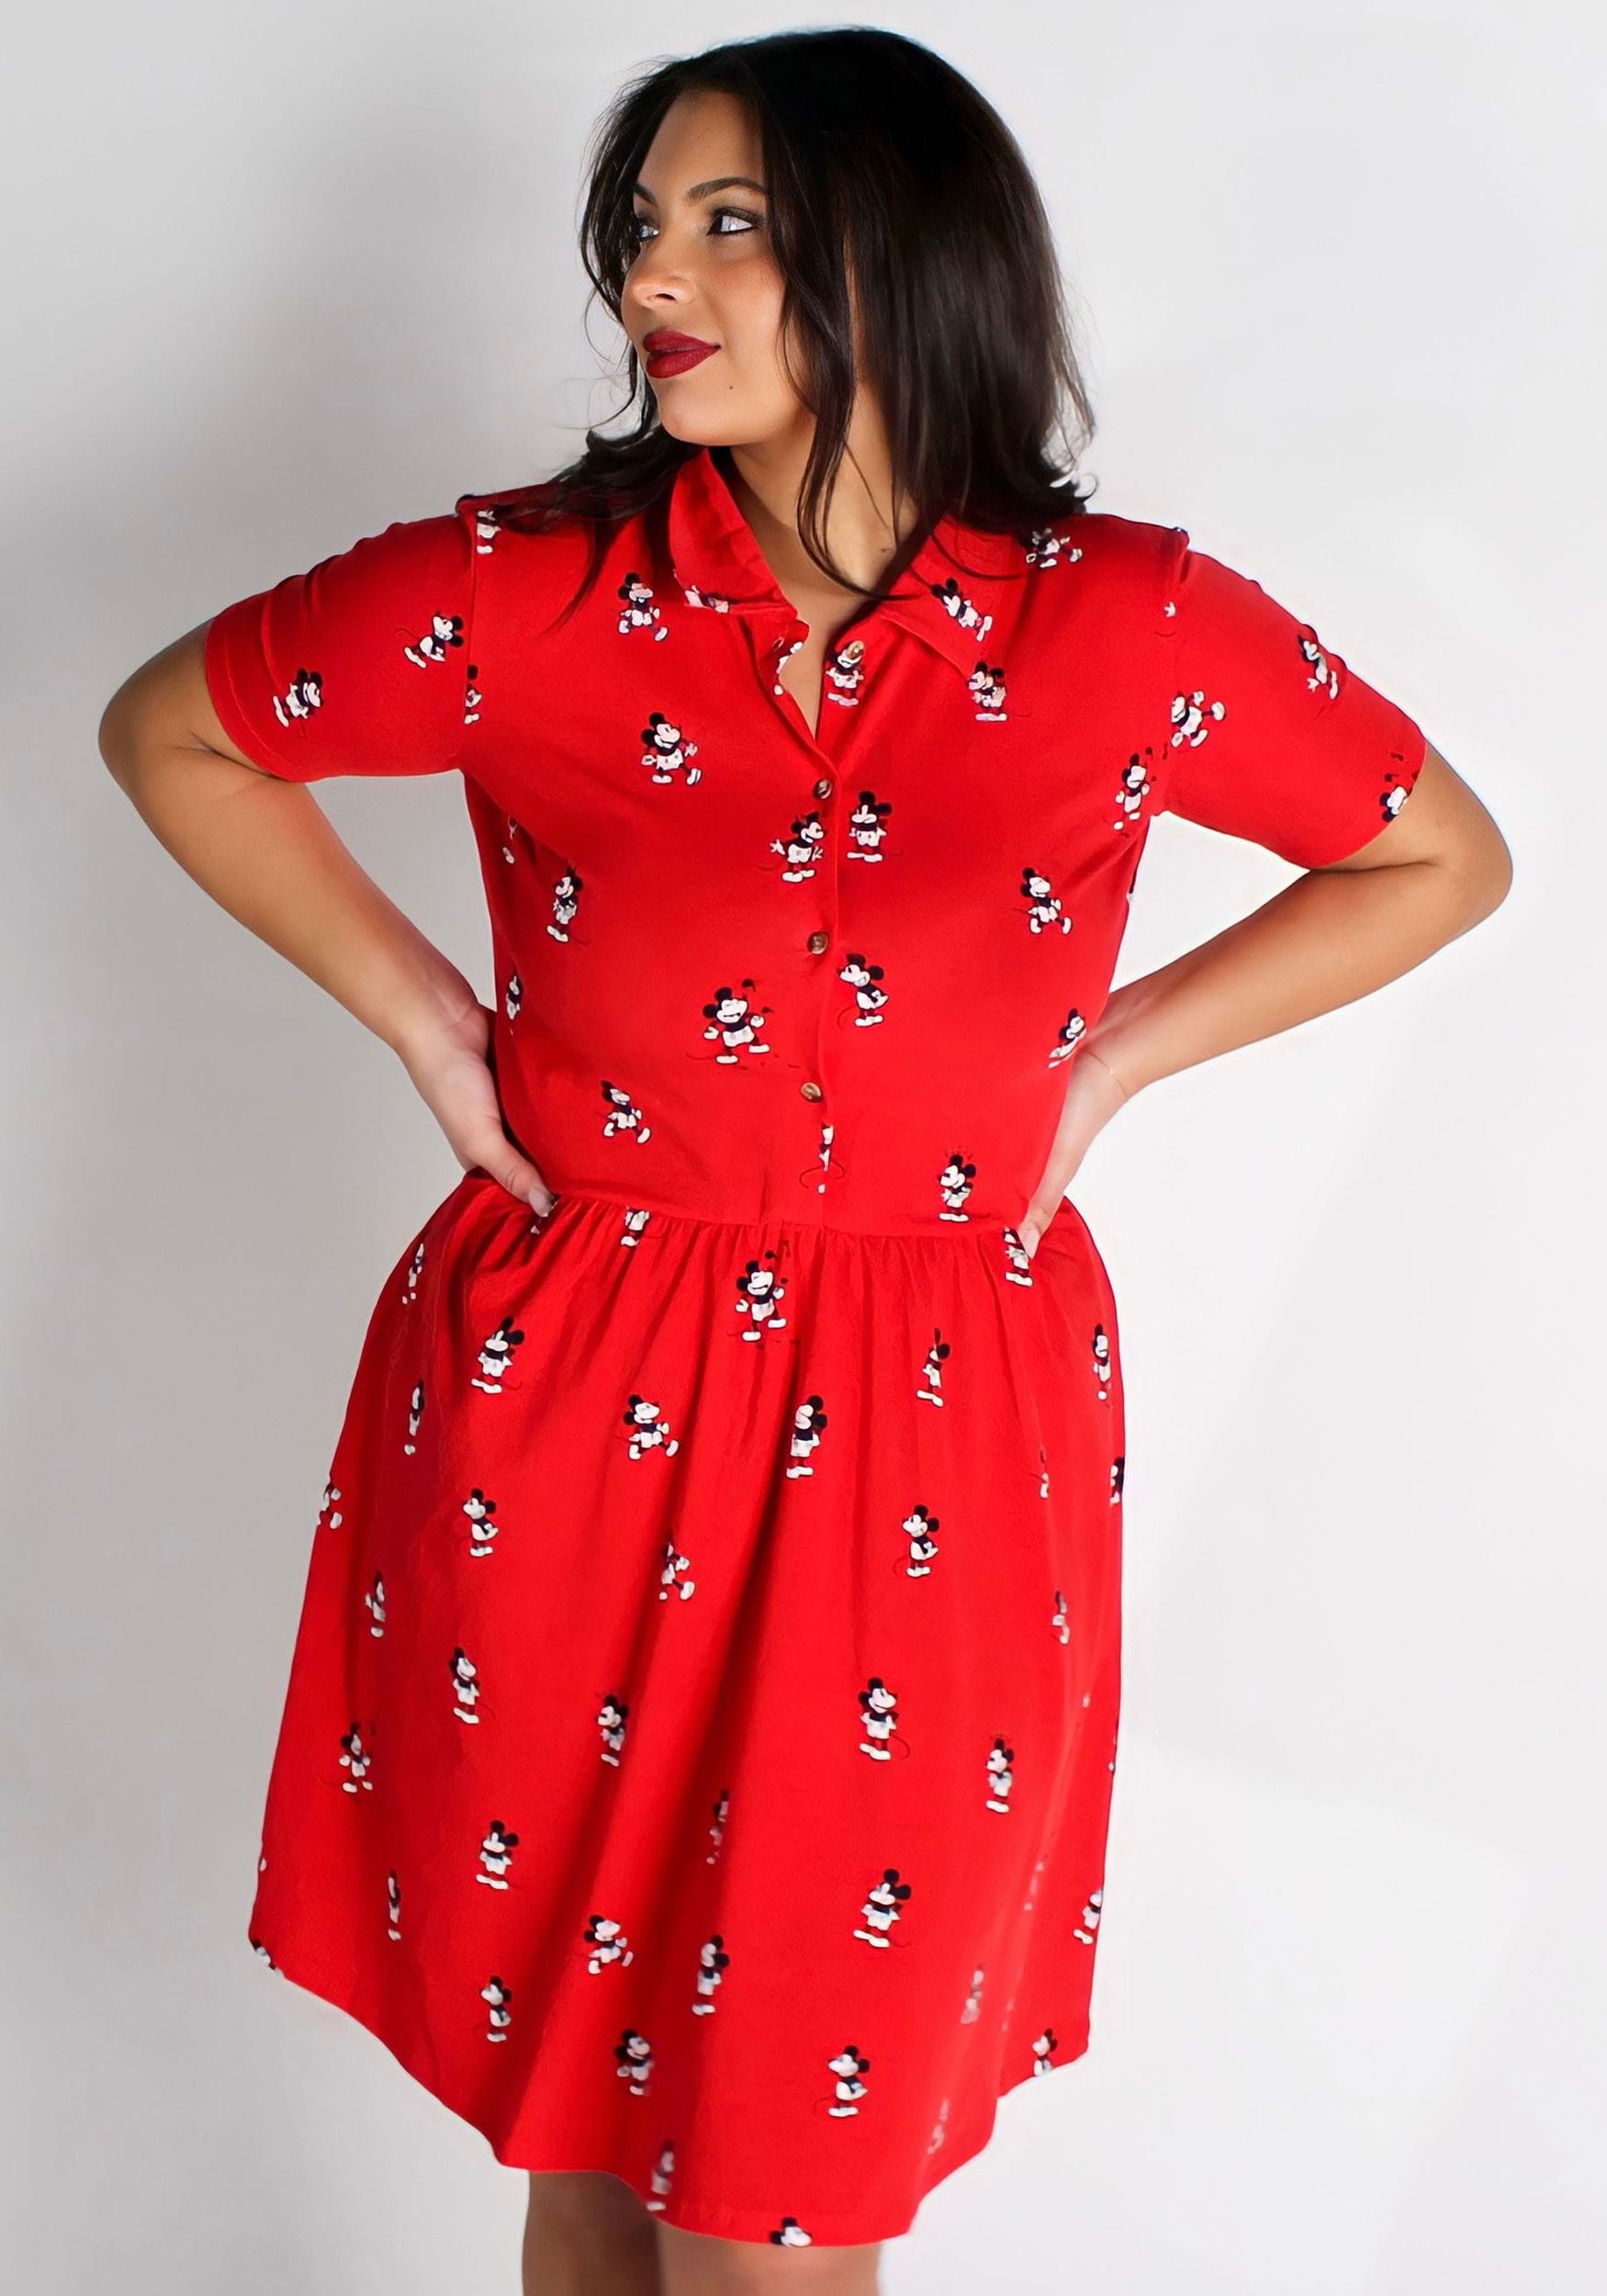 Women's Cakeworthy Vintage Mickey Mouse Button Up Dress